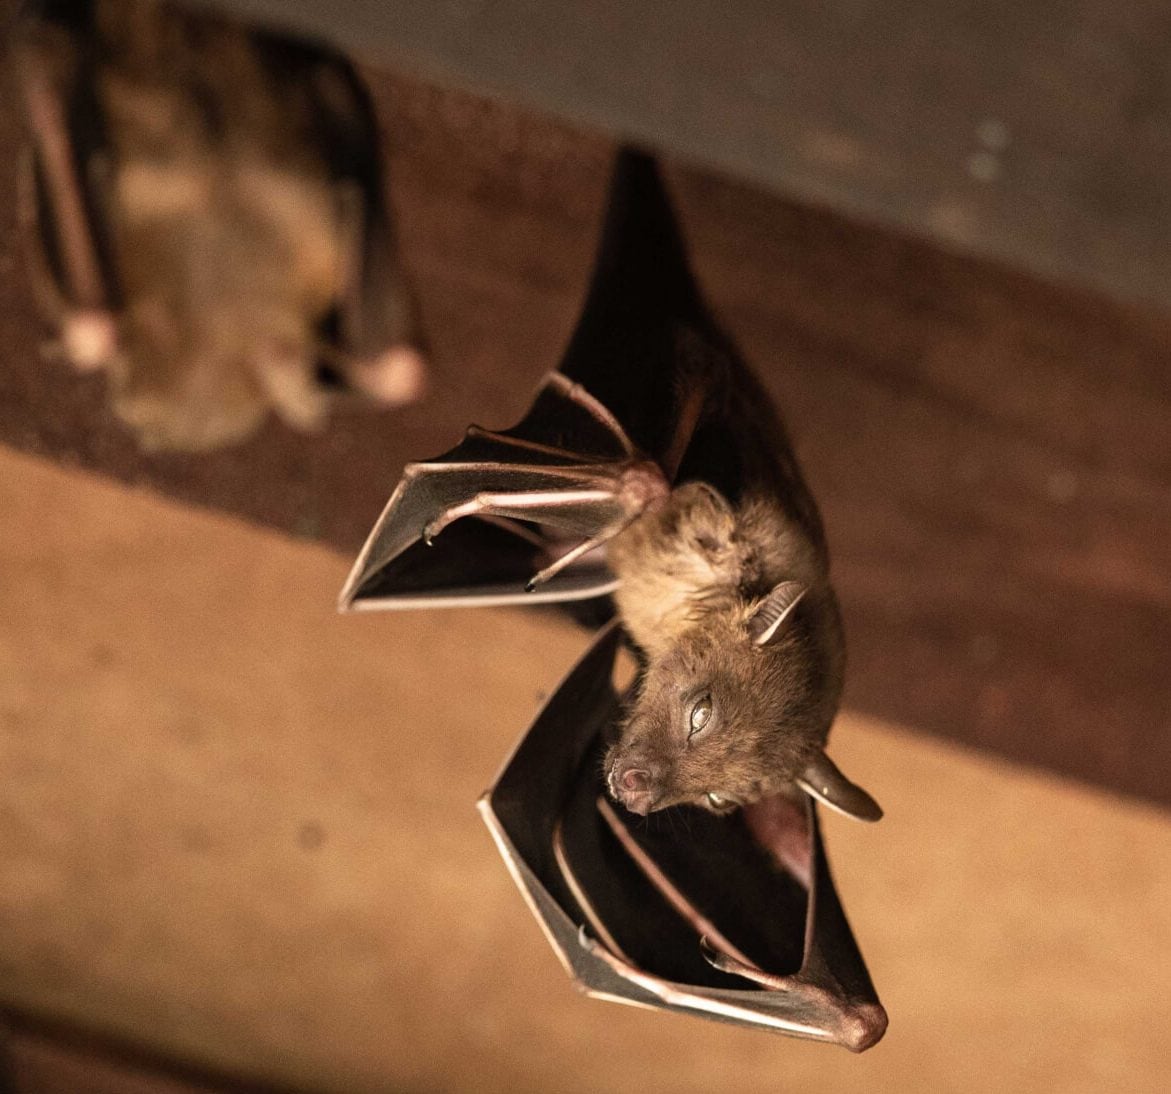 Expert bat removal services for a safe and humane solution in Washington